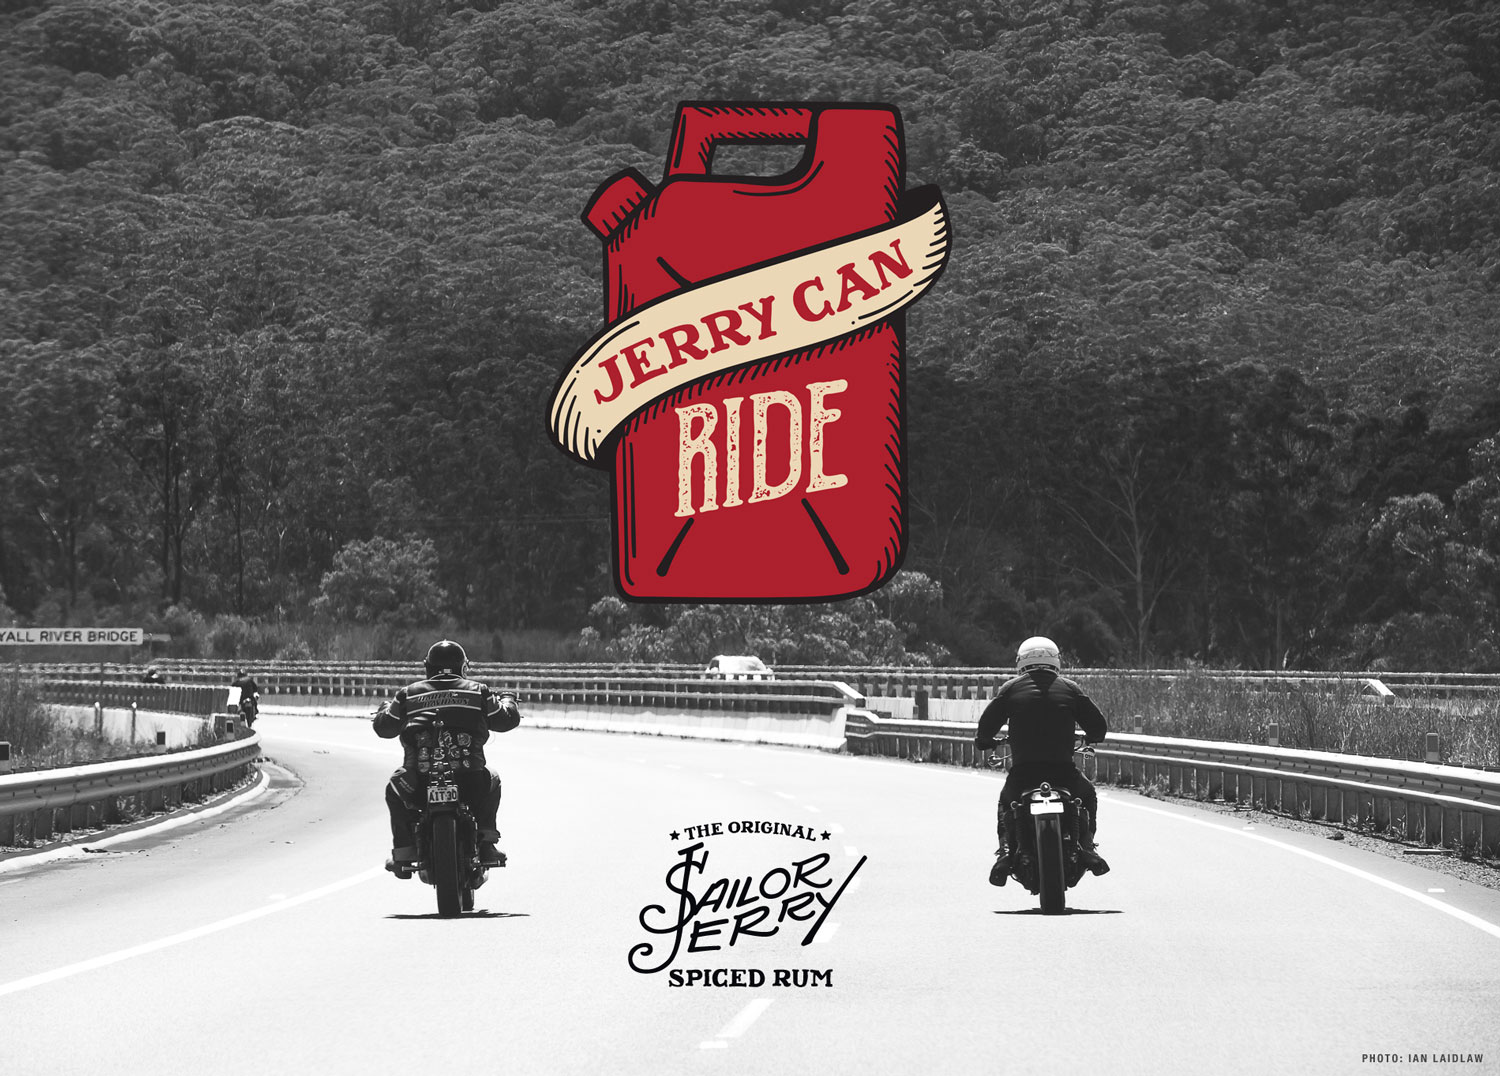 The Jerry Can Ride by Sailor Jerry image